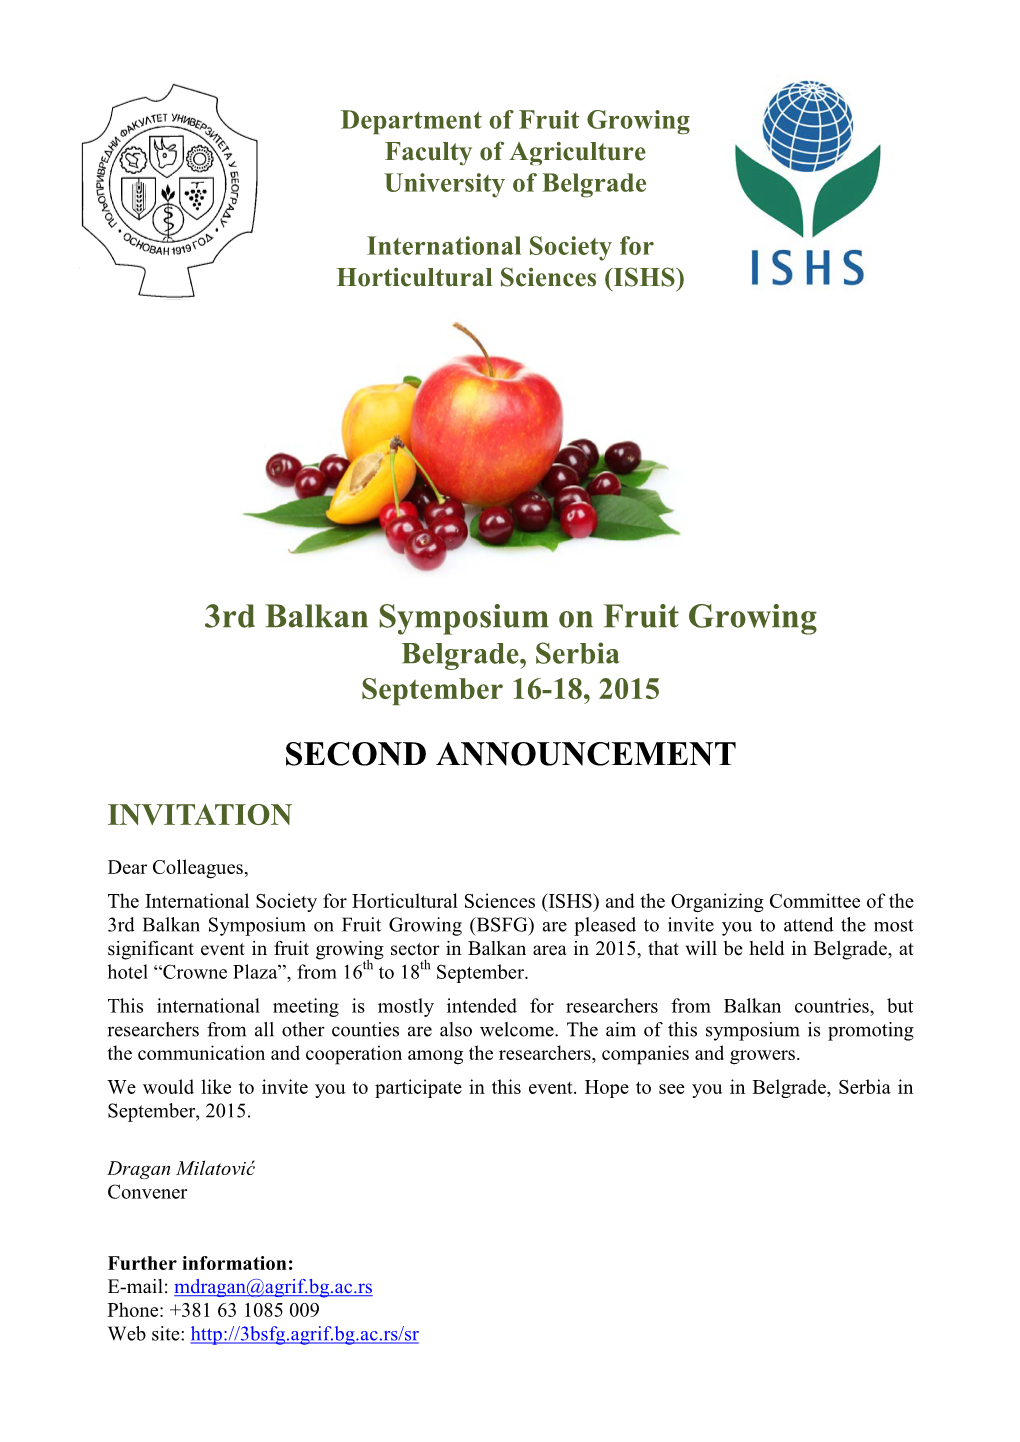 3Rd Balkan Symposium on Fruit Growing SECOND ANNOUNCEMENT